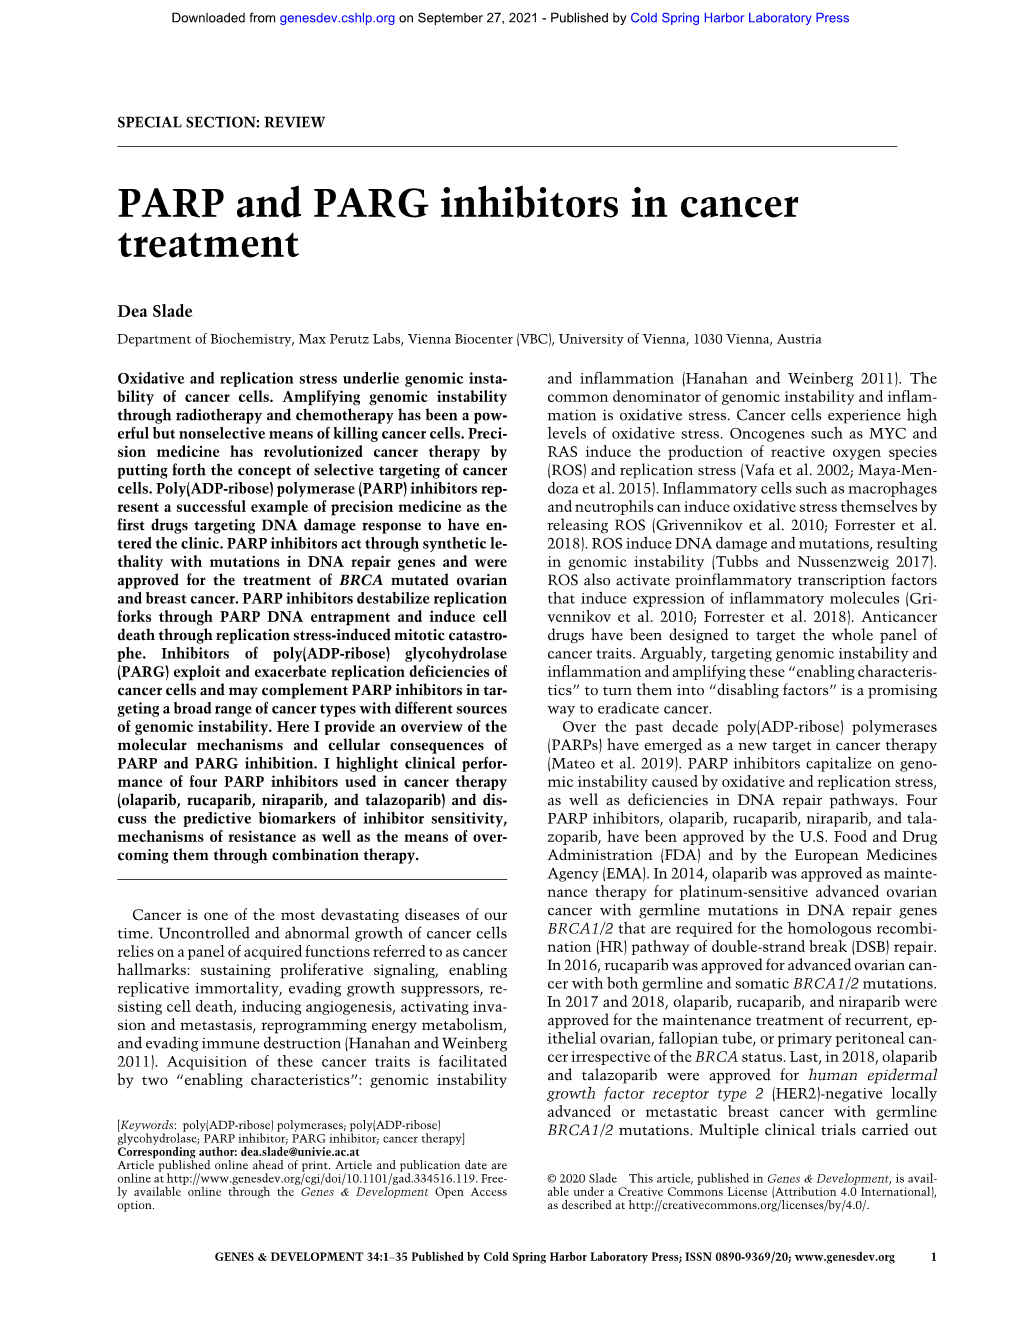 PARP and PARG Inhibitors in Cancer Treatment